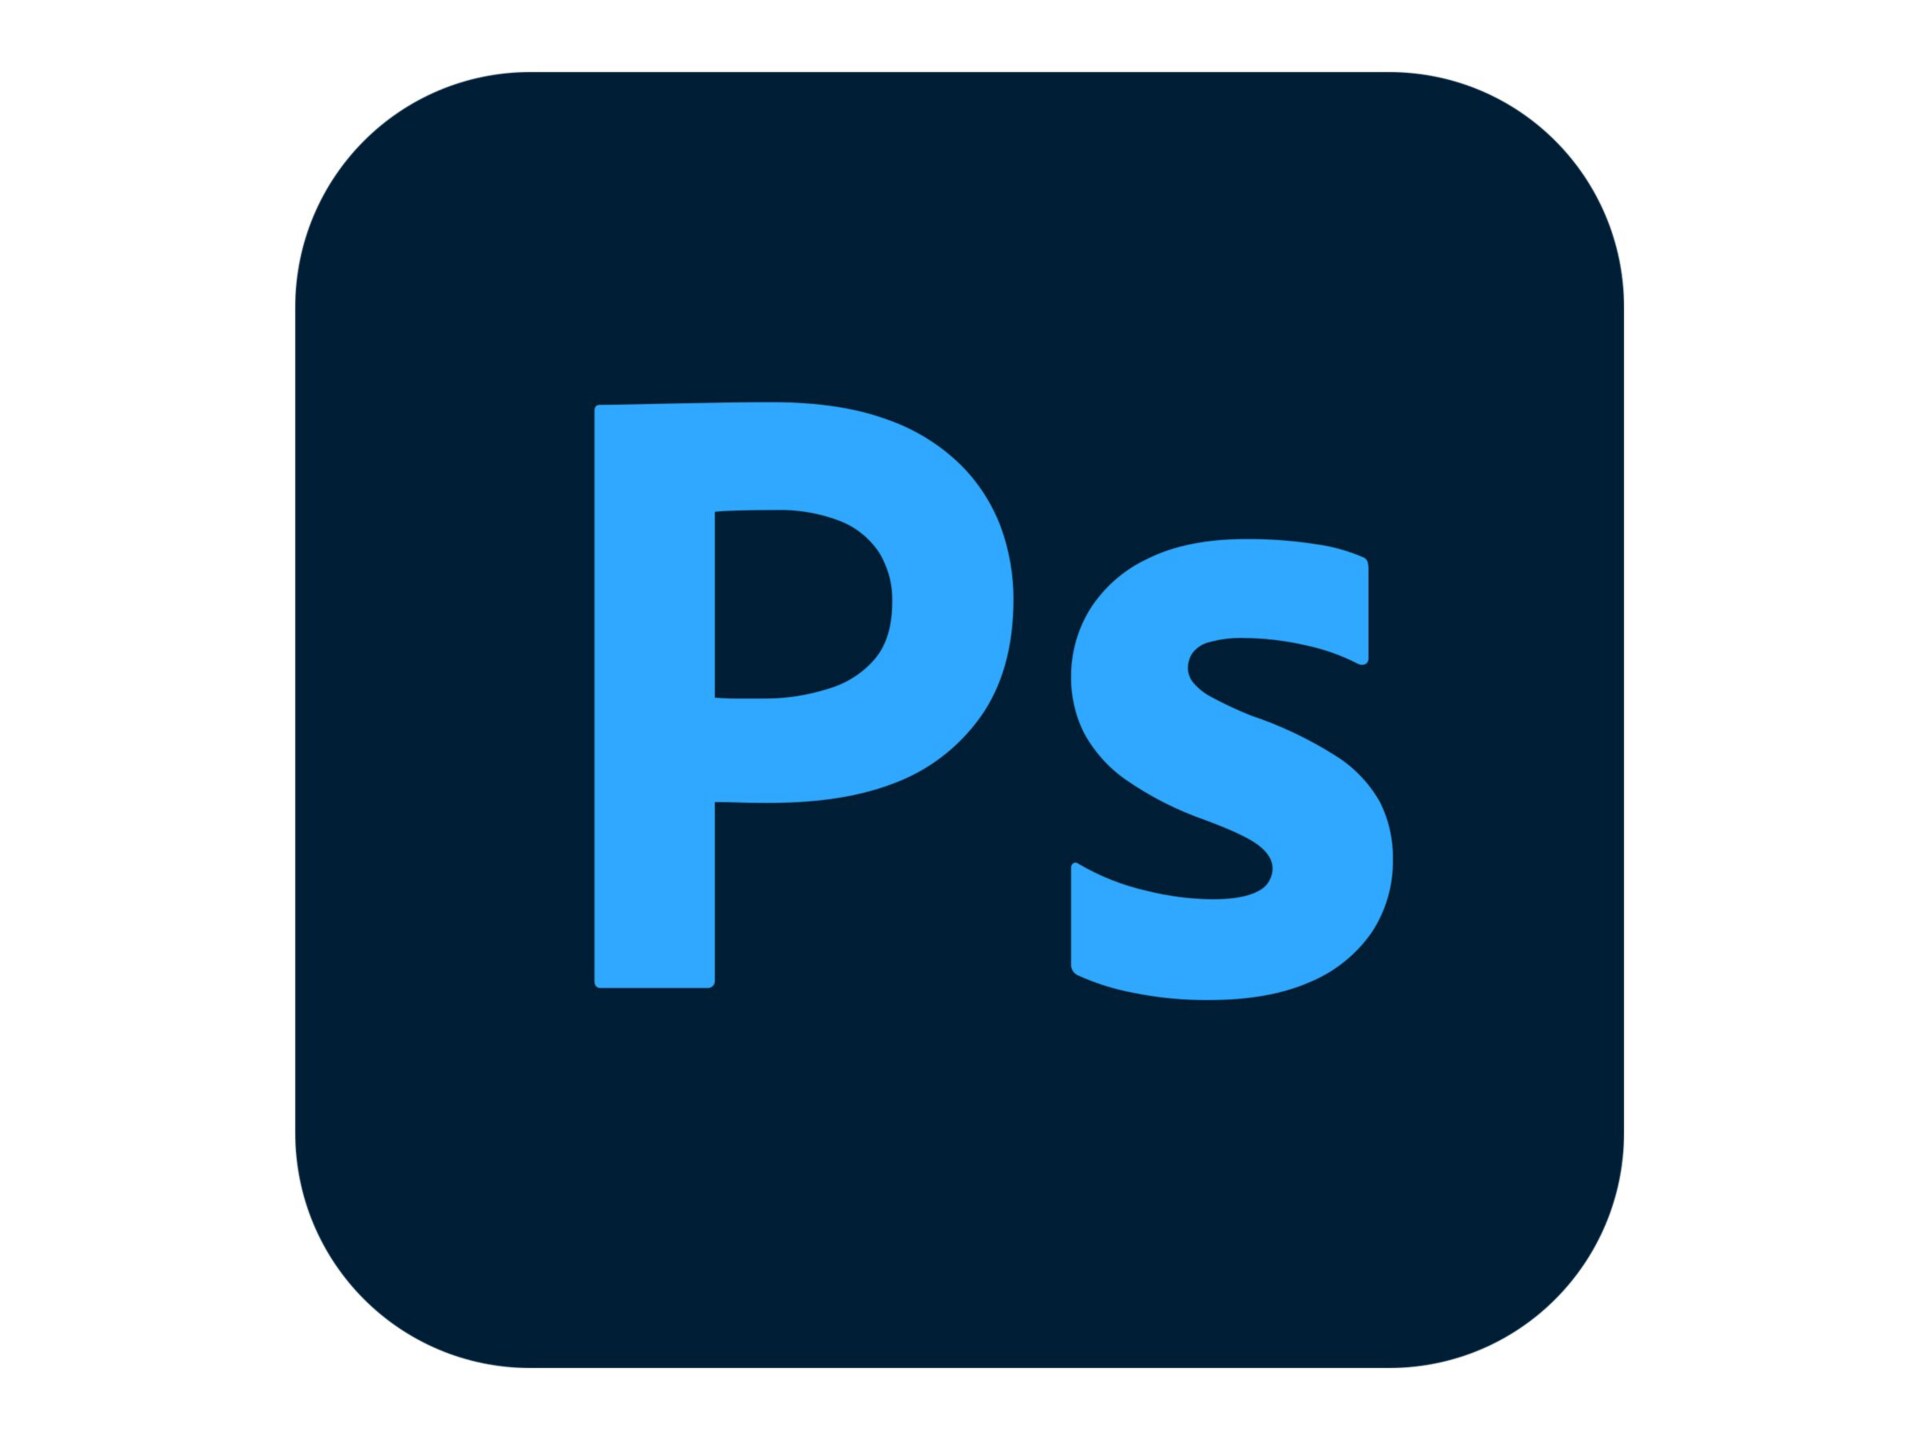 Adobe Photoshop CC for teams - Subscription New (35 months) - 1 named user